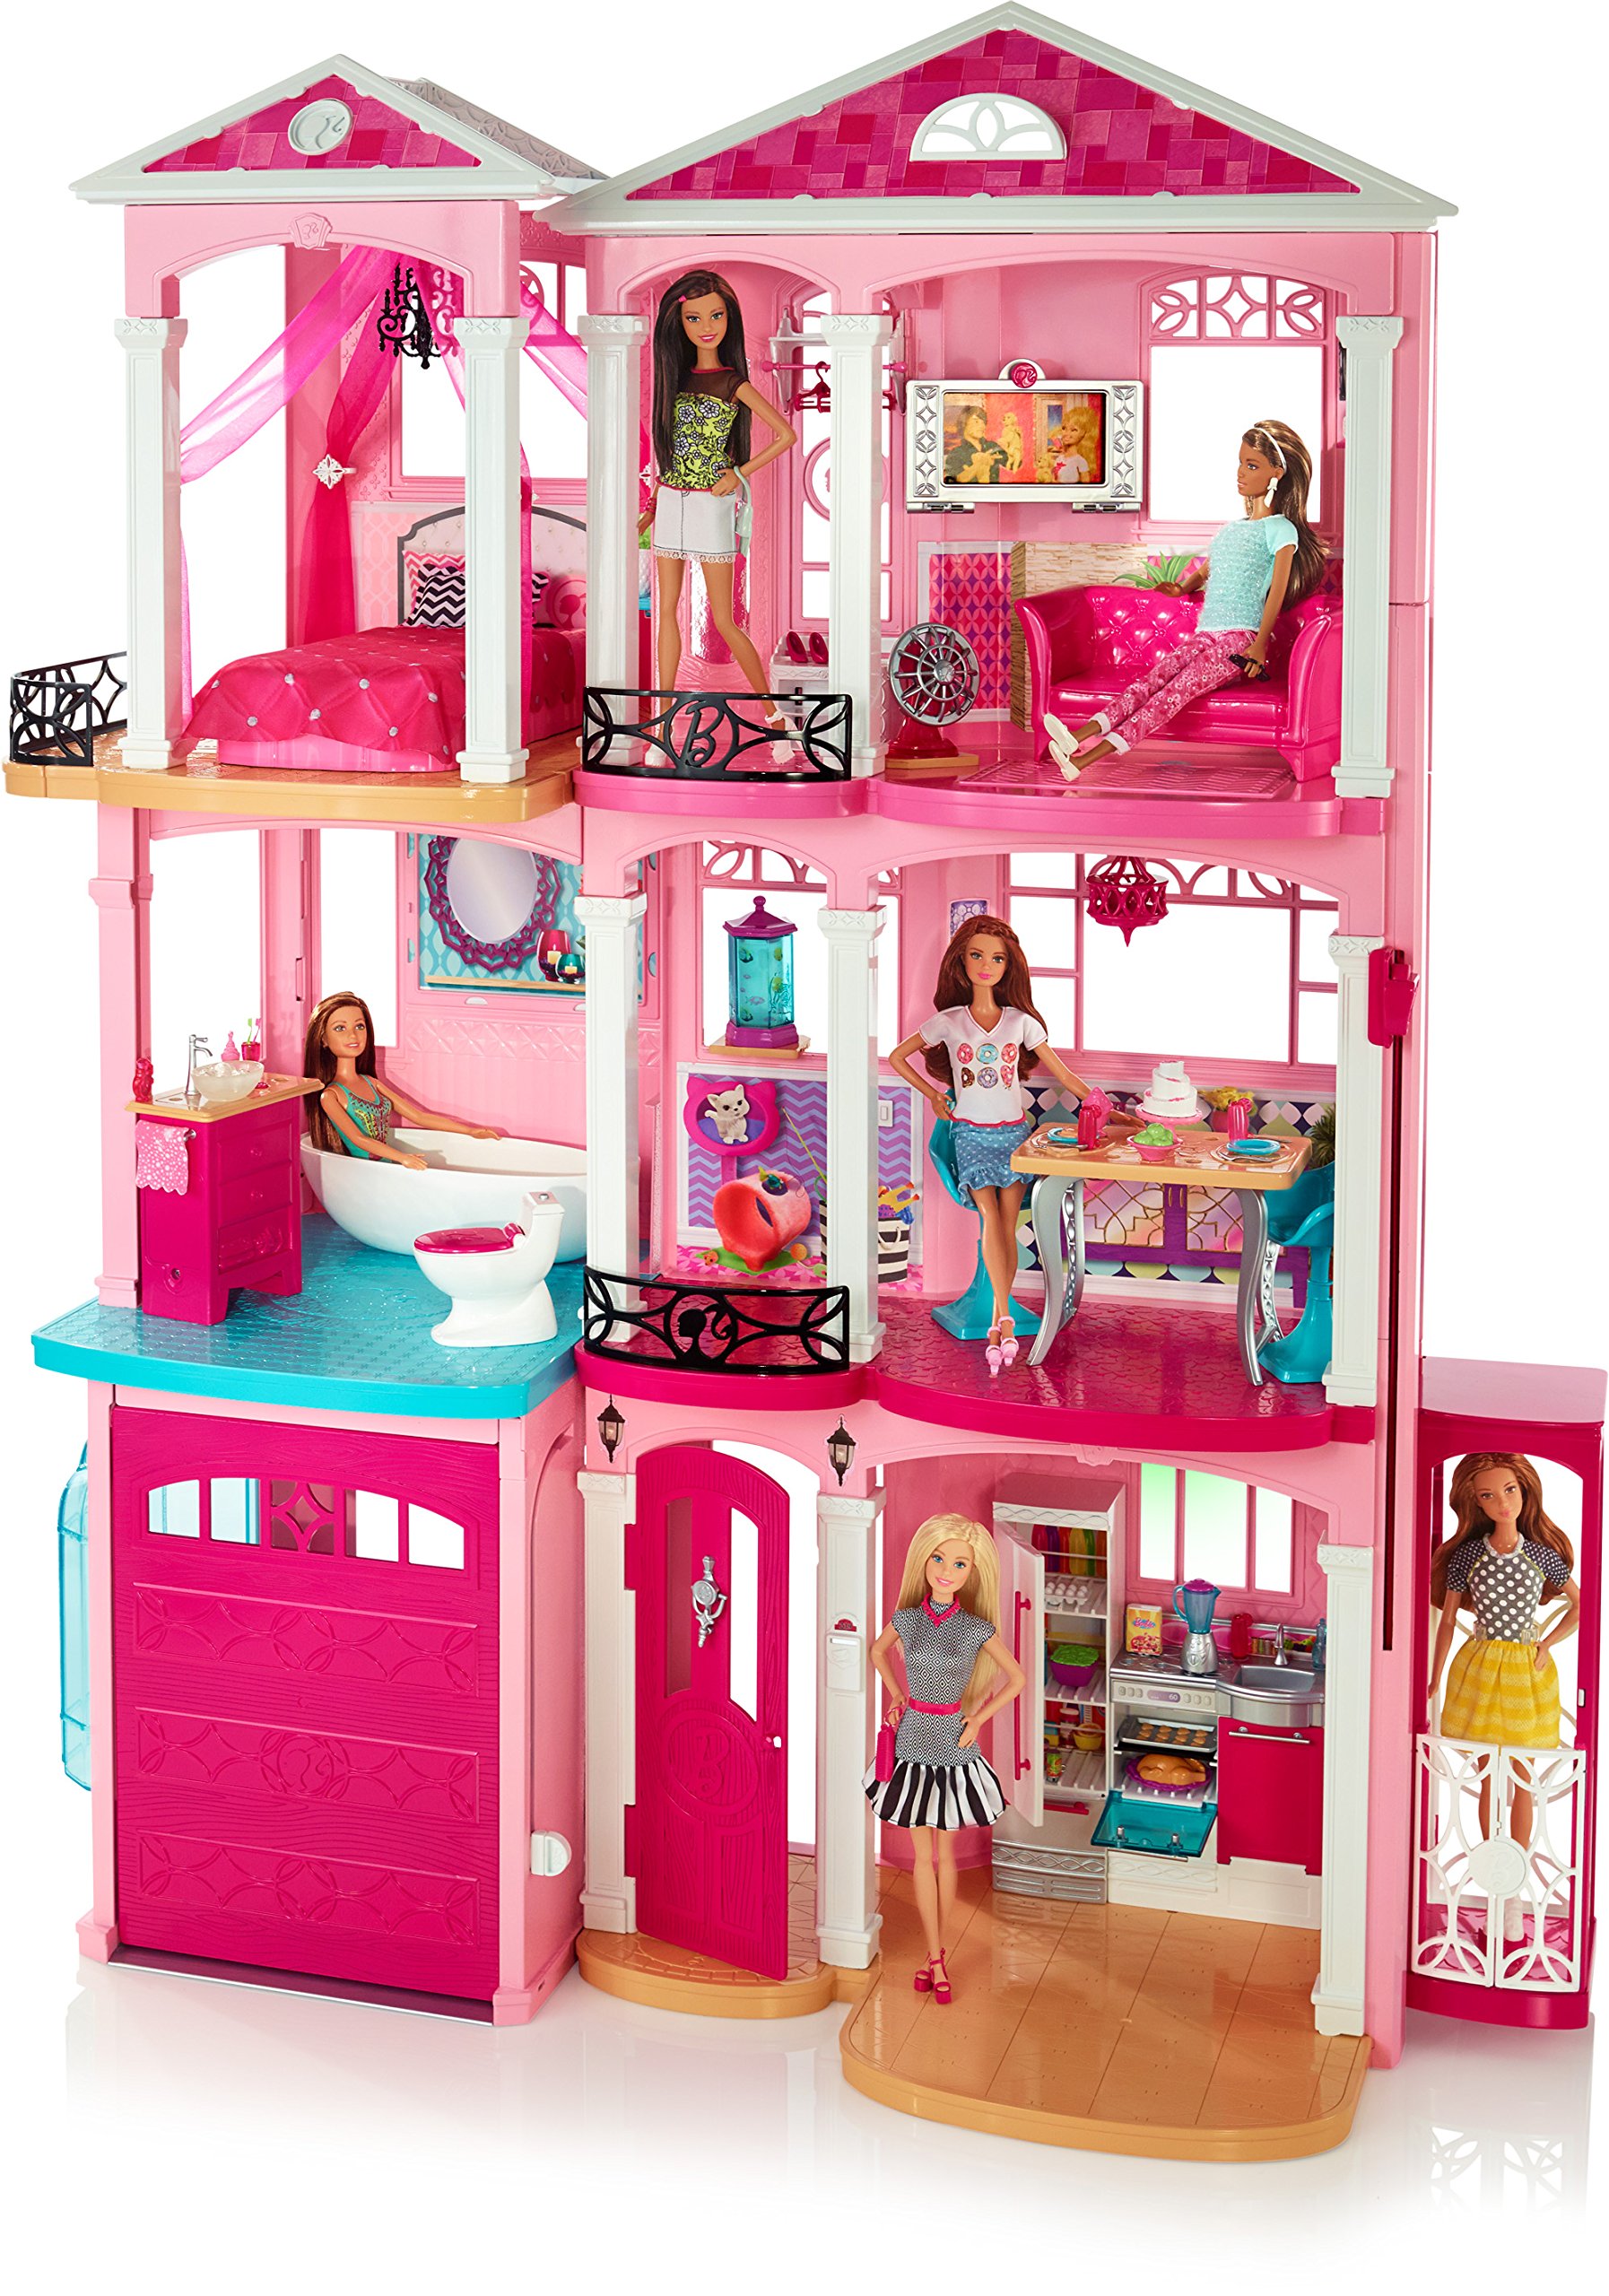 Barbie Dreamhouse With doll For Ages 3 years and up